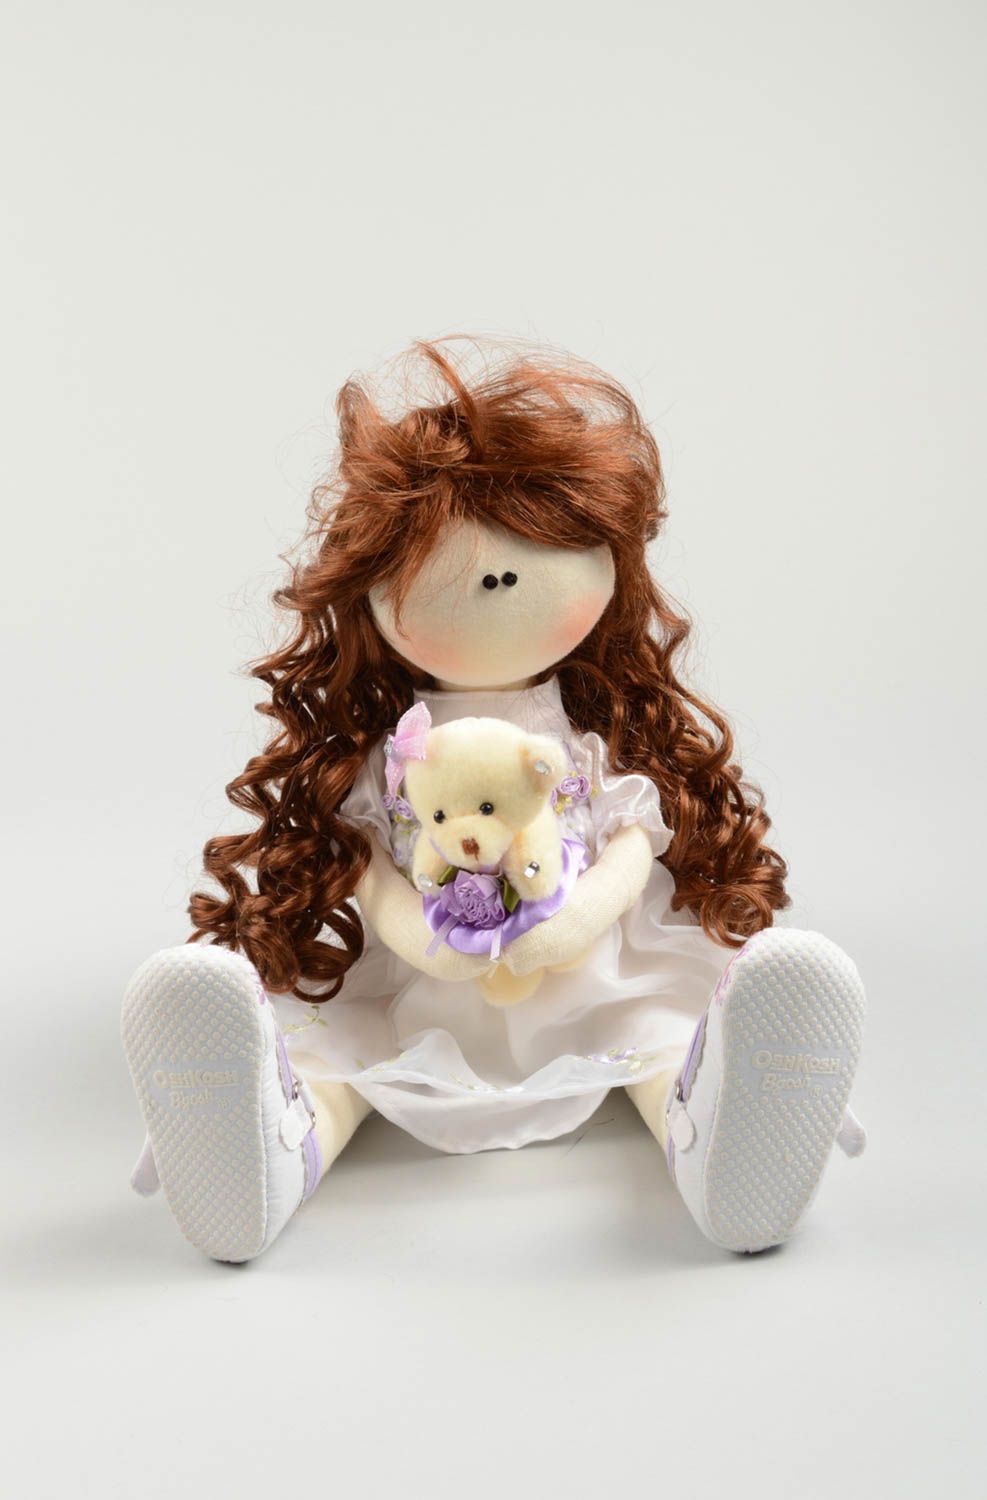 Unusual handmade soft toy stuffed toy rag doll for kids interior decorating  photo 3